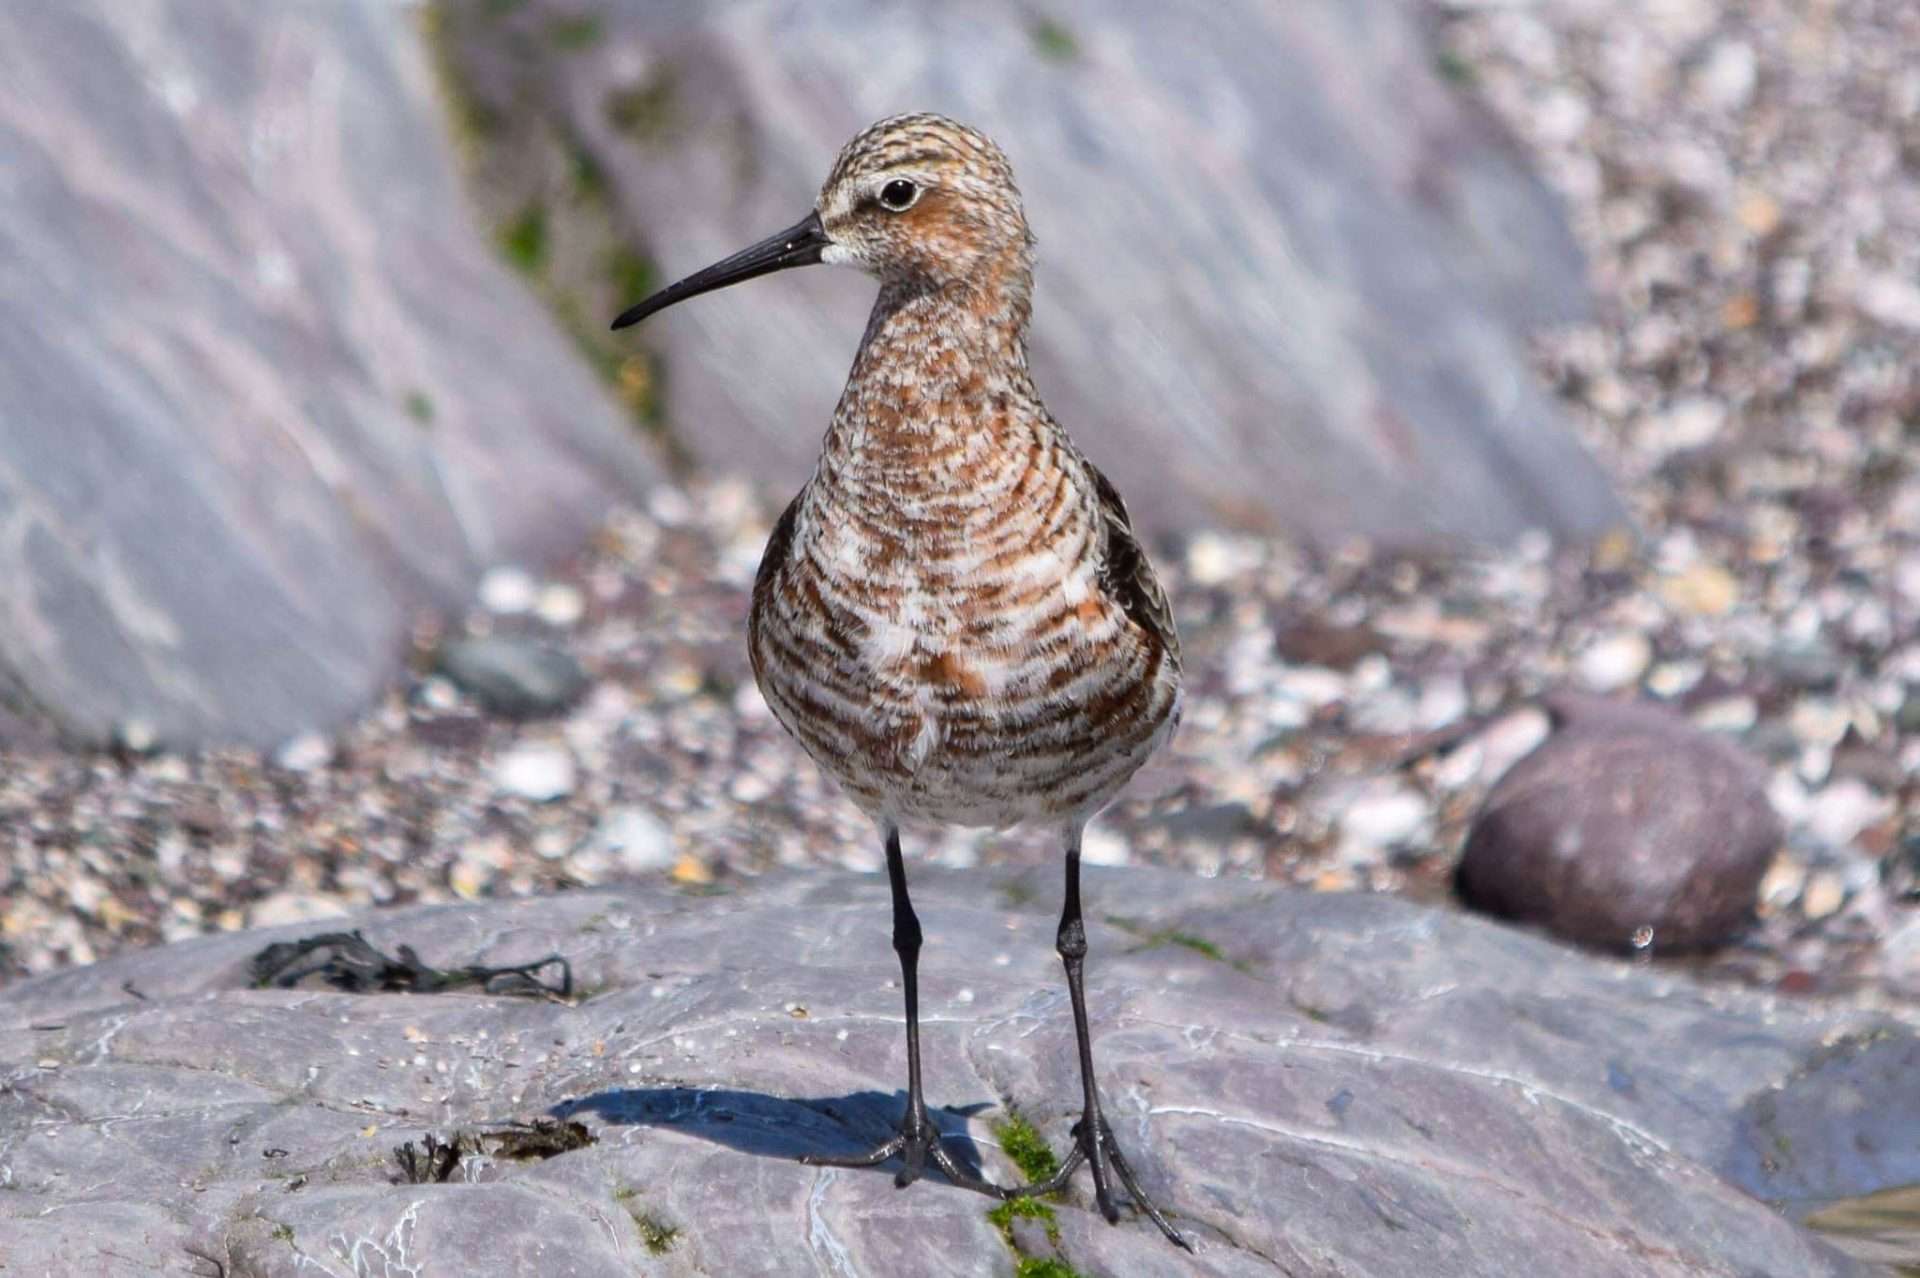 Curlew Sandpiper by Duncan Leitch at Wembury Point